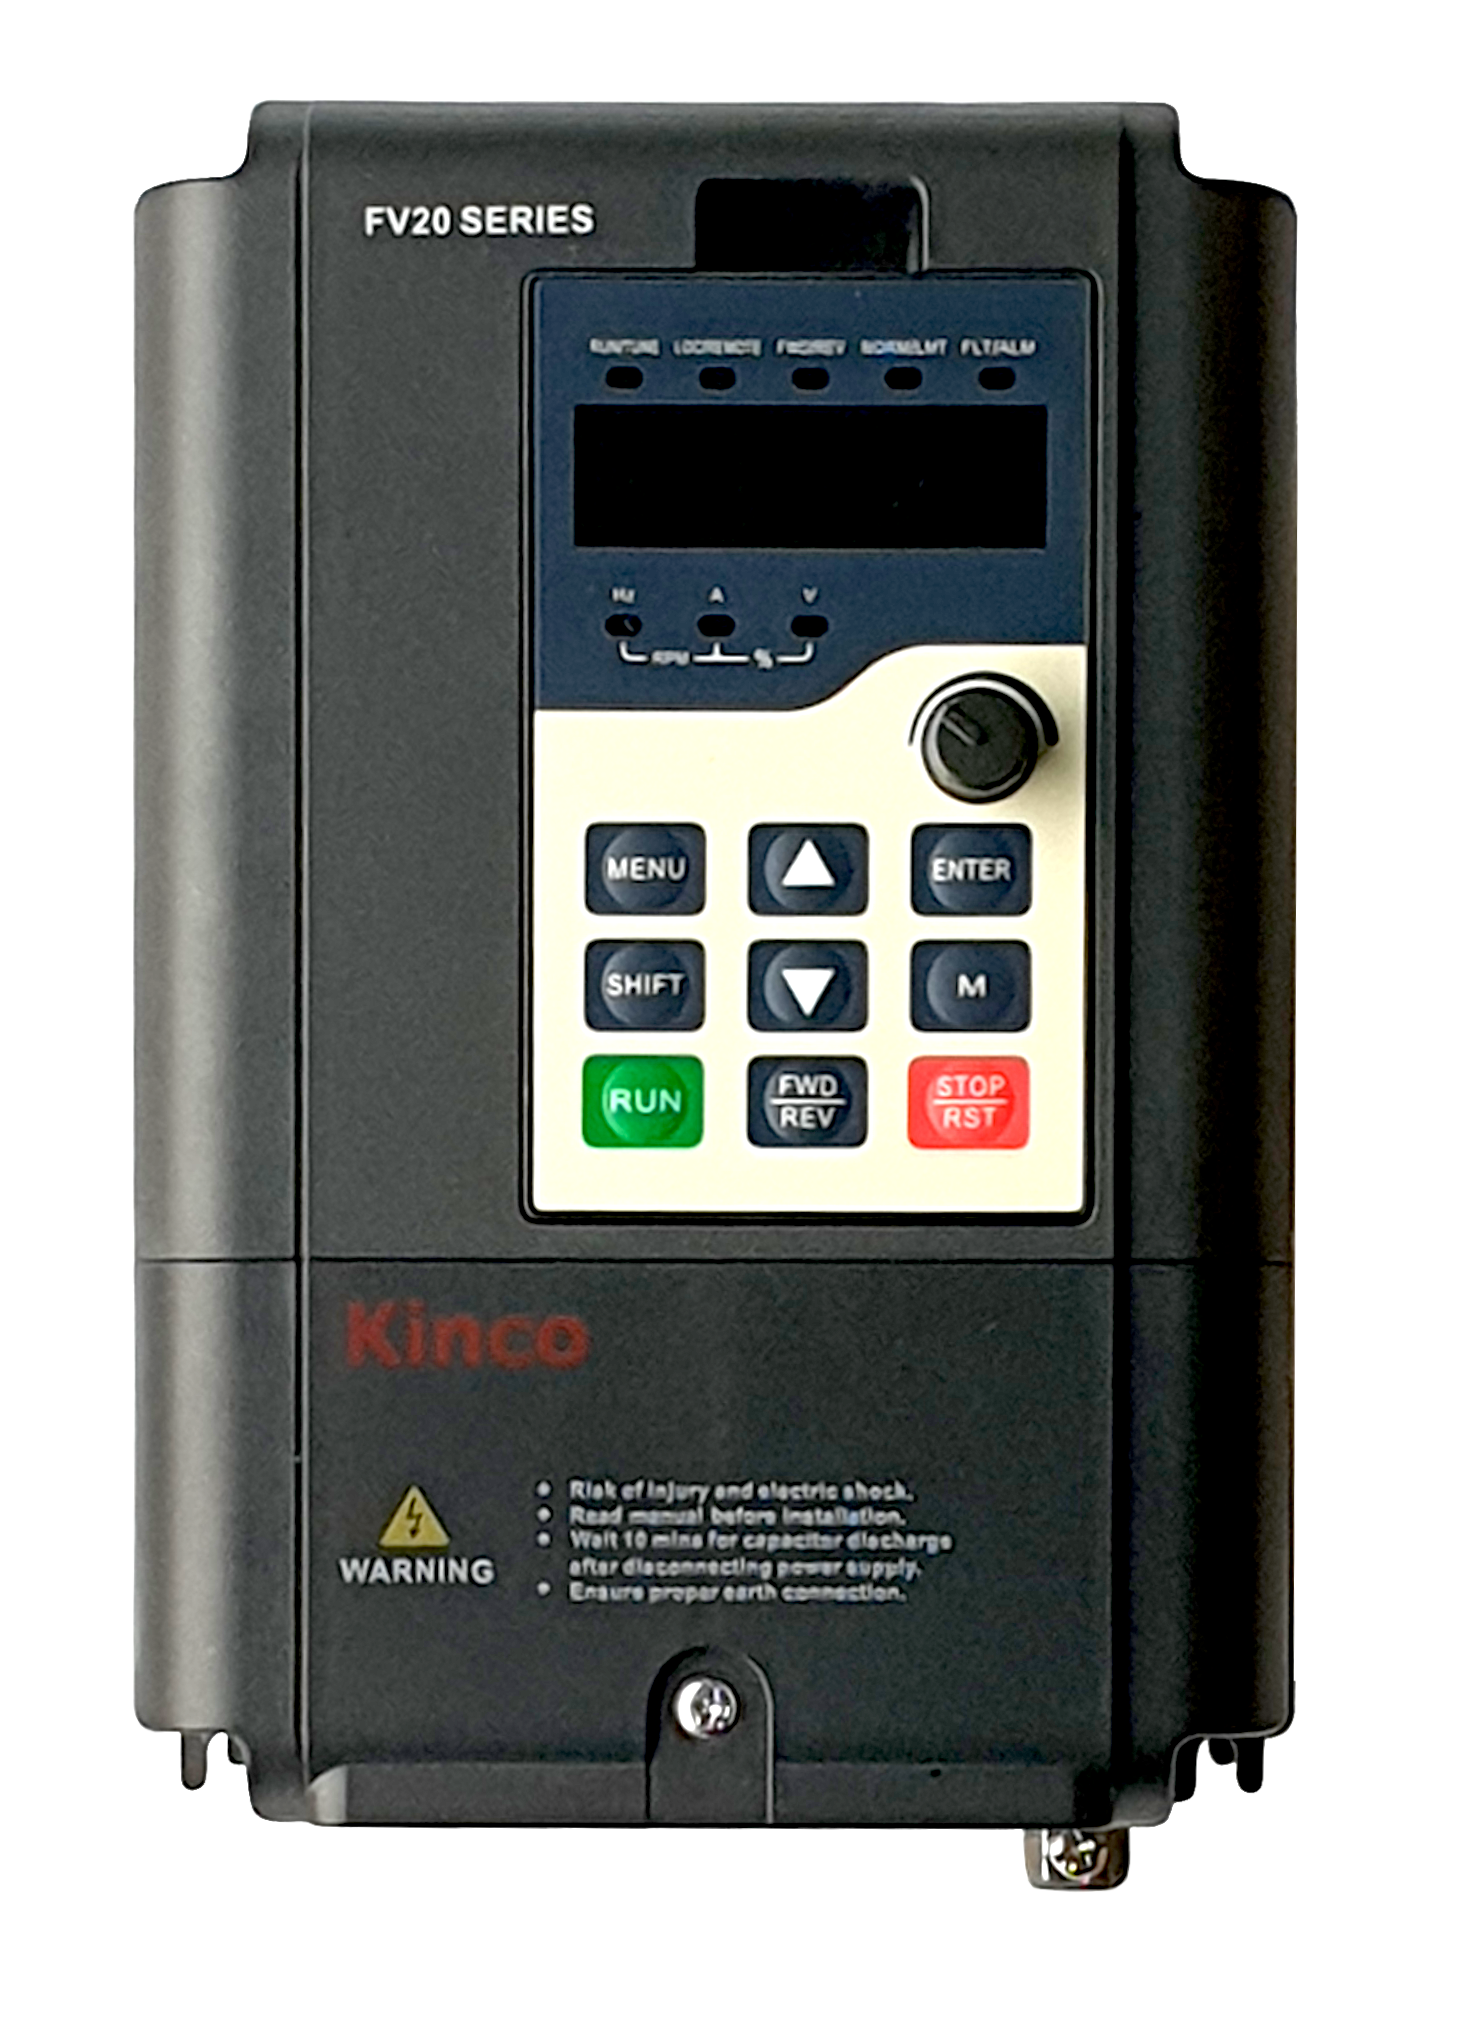 Kinco frequency converter FV20-4T-0015G (1.5 kW) three-phase 400 VAC 